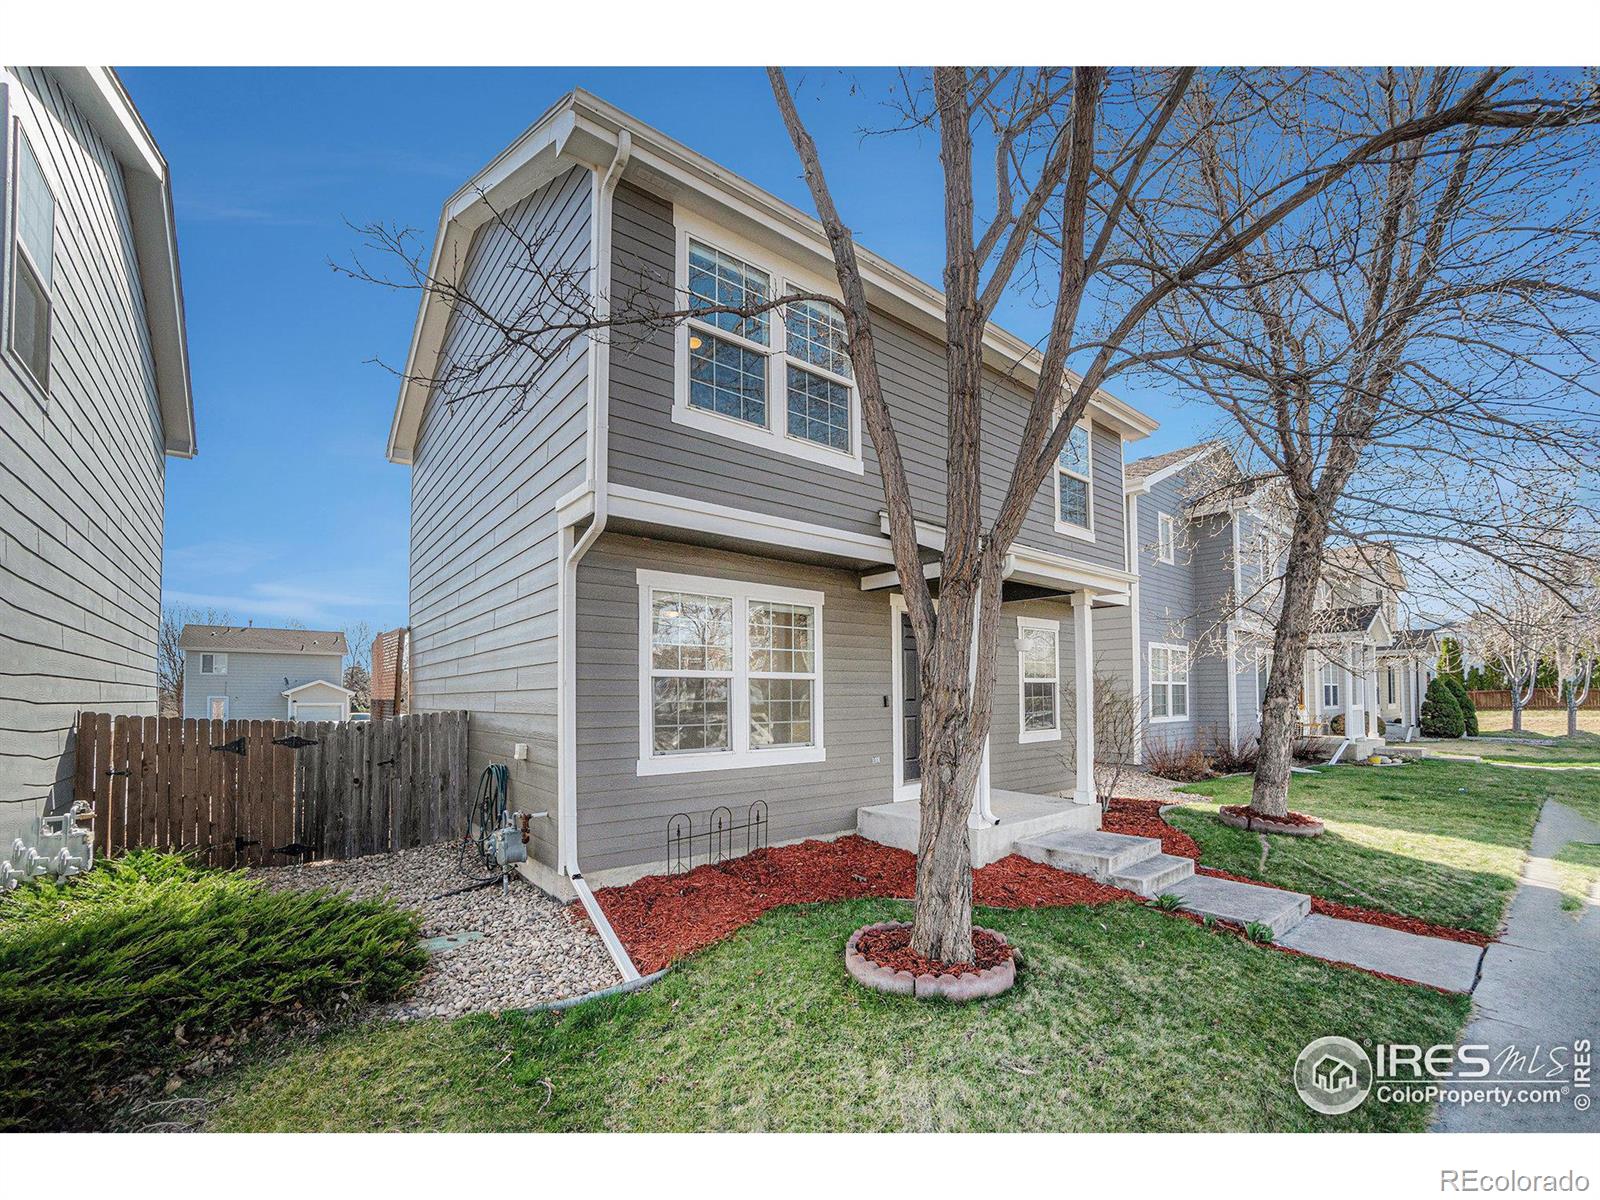 6820  Colony Hills Lane, fort collins MLS: 4567891007055 Beds: 3 Baths: 2 Price: $465,000